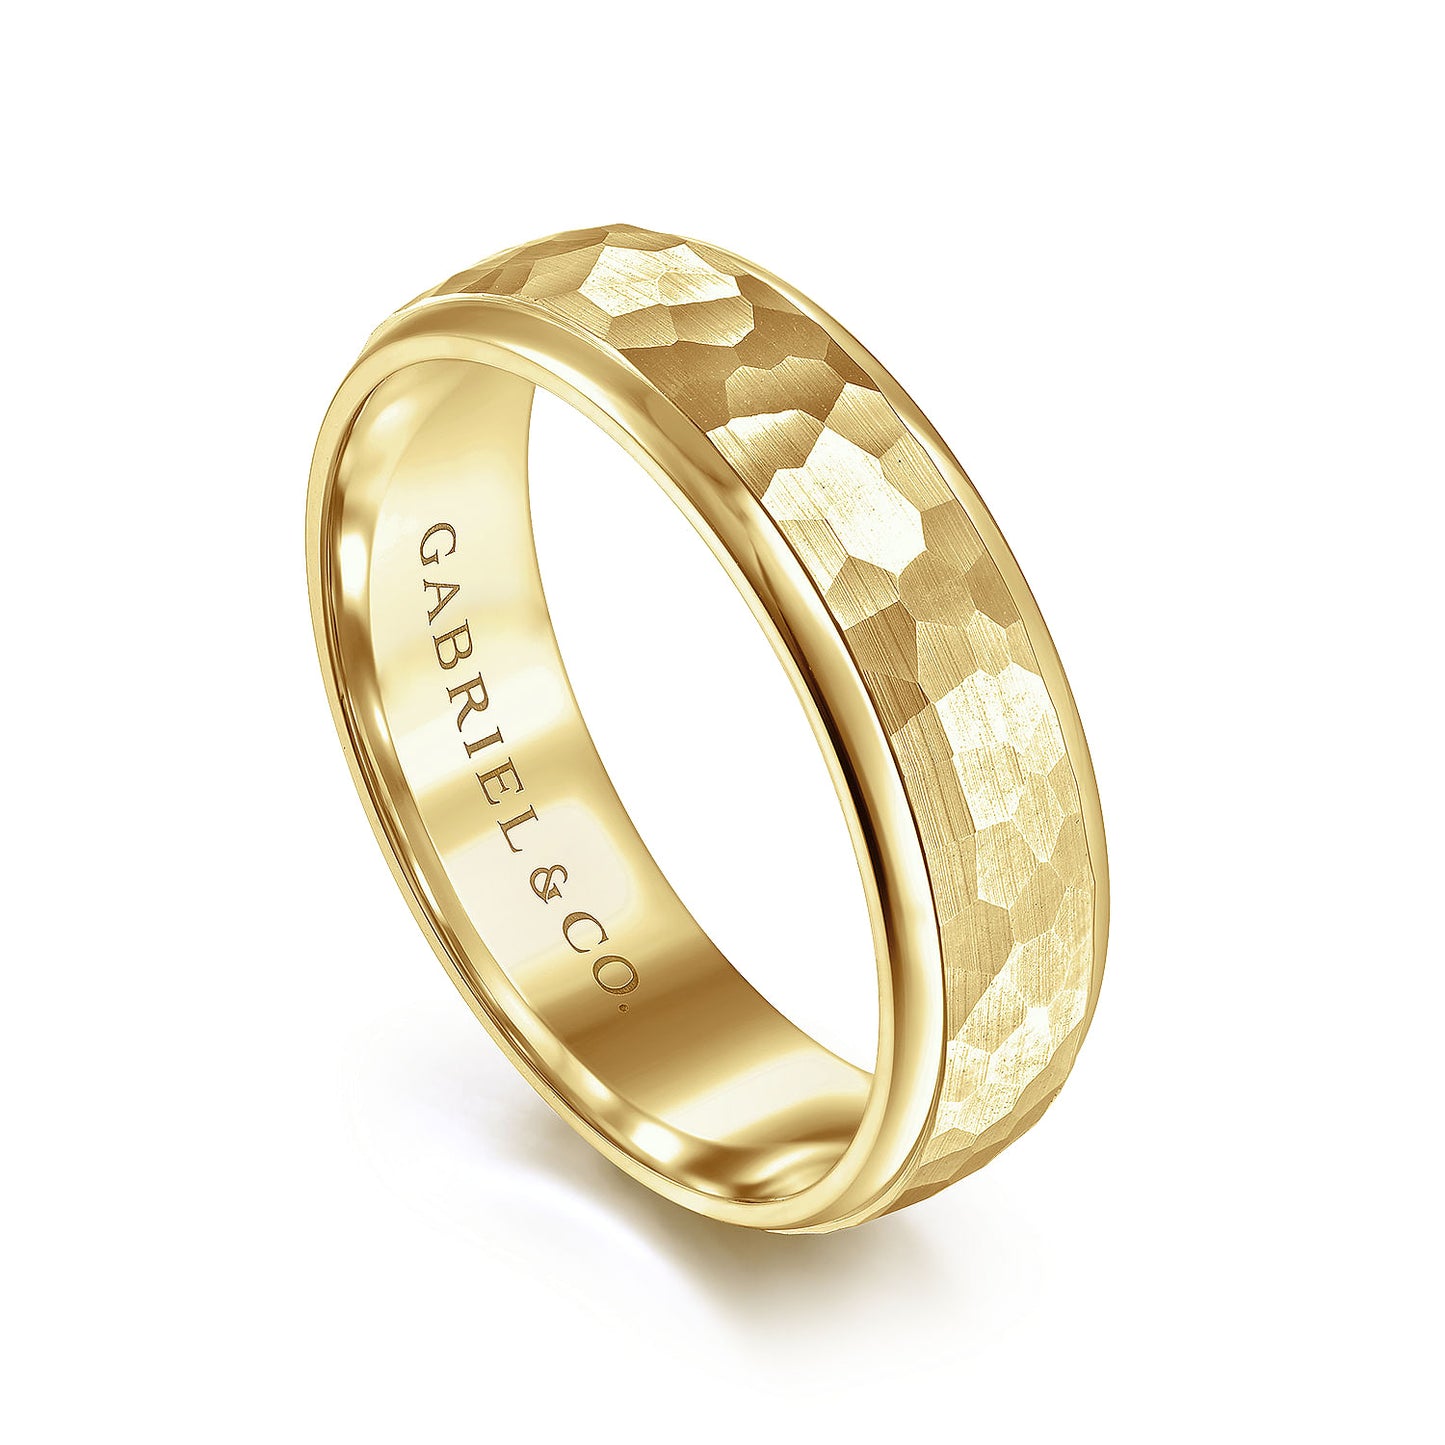 Gabriel & Co Yellow Gold Wedding Band With A Hammered Finished Center And Polished Edges - Gold Wedding Bands - Men's